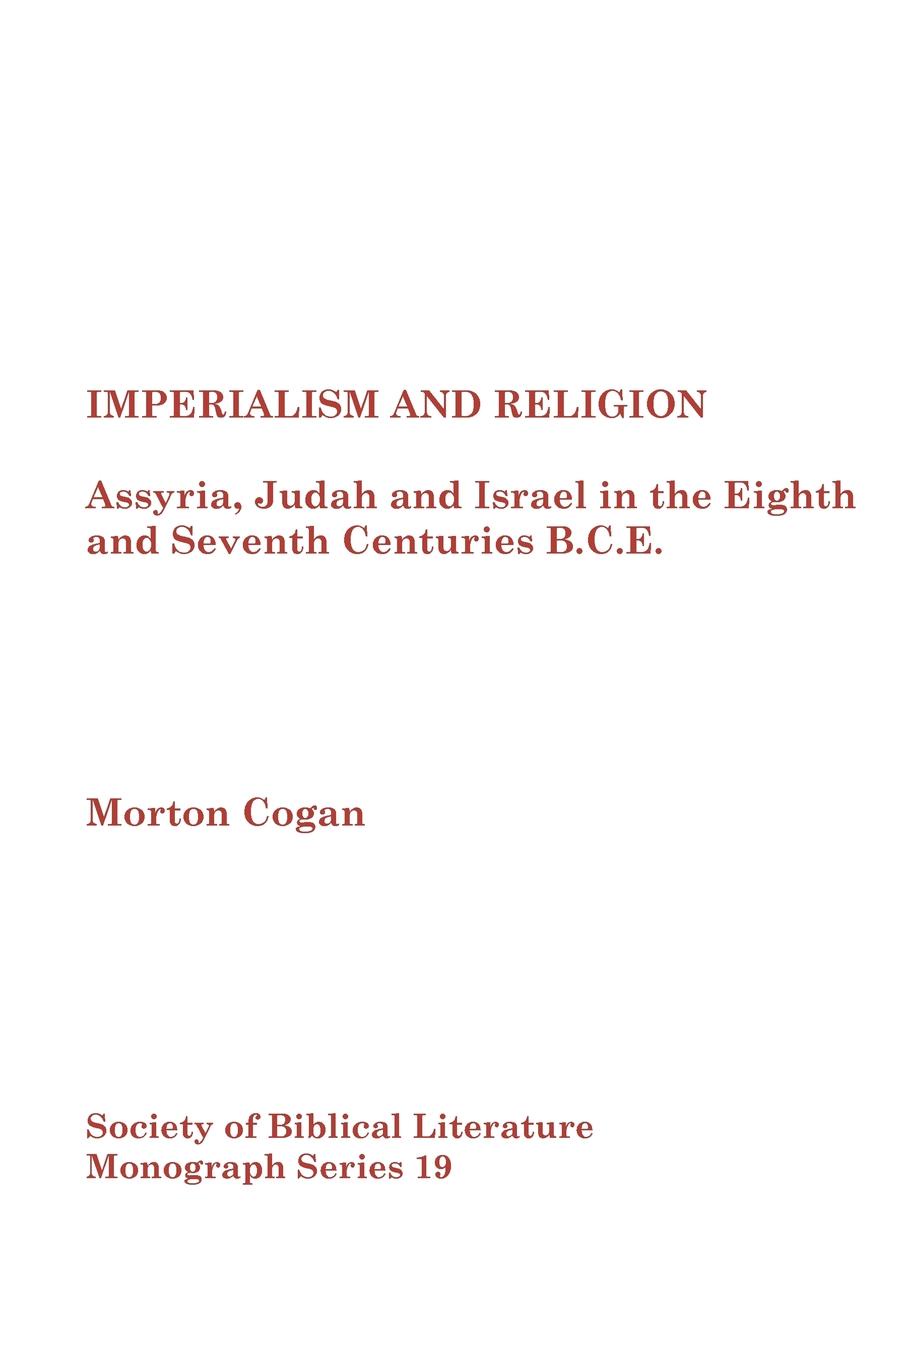 Imperialism and Religion. Assyria, Judah and Israel in the Eighth and Seventh Centuries B.C.E.